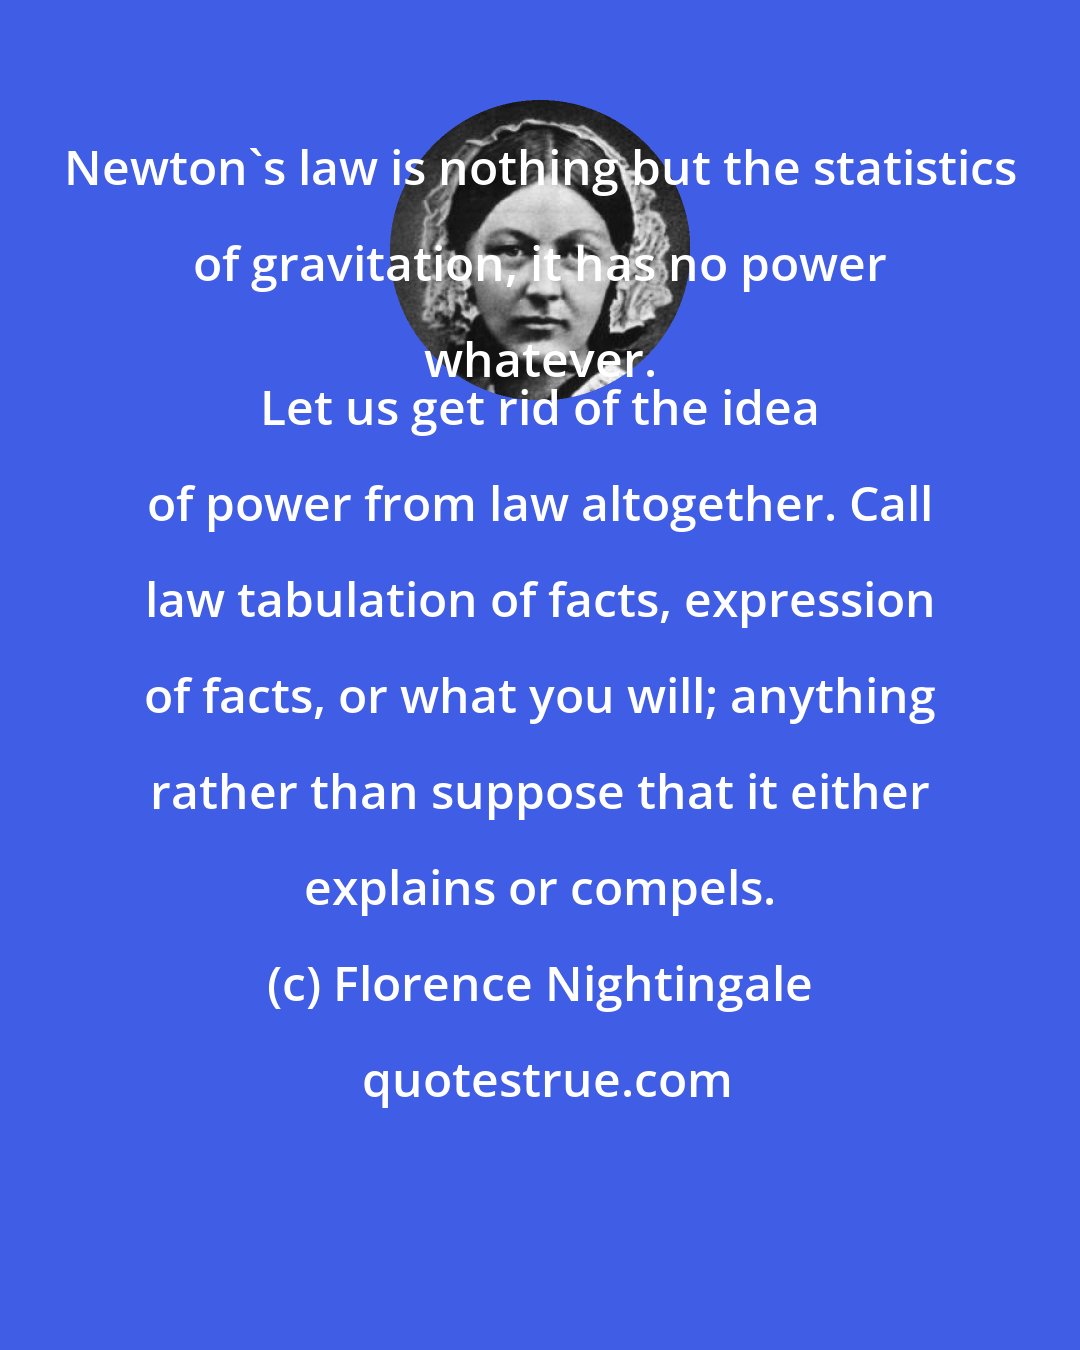 Florence Nightingale: Newton's law is nothing but the statistics of gravitation, it has no power whatever. 
 Let us get rid of the idea of power from law altogether. Call law tabulation of facts, expression of facts, or what you will; anything rather than suppose that it either explains or compels.